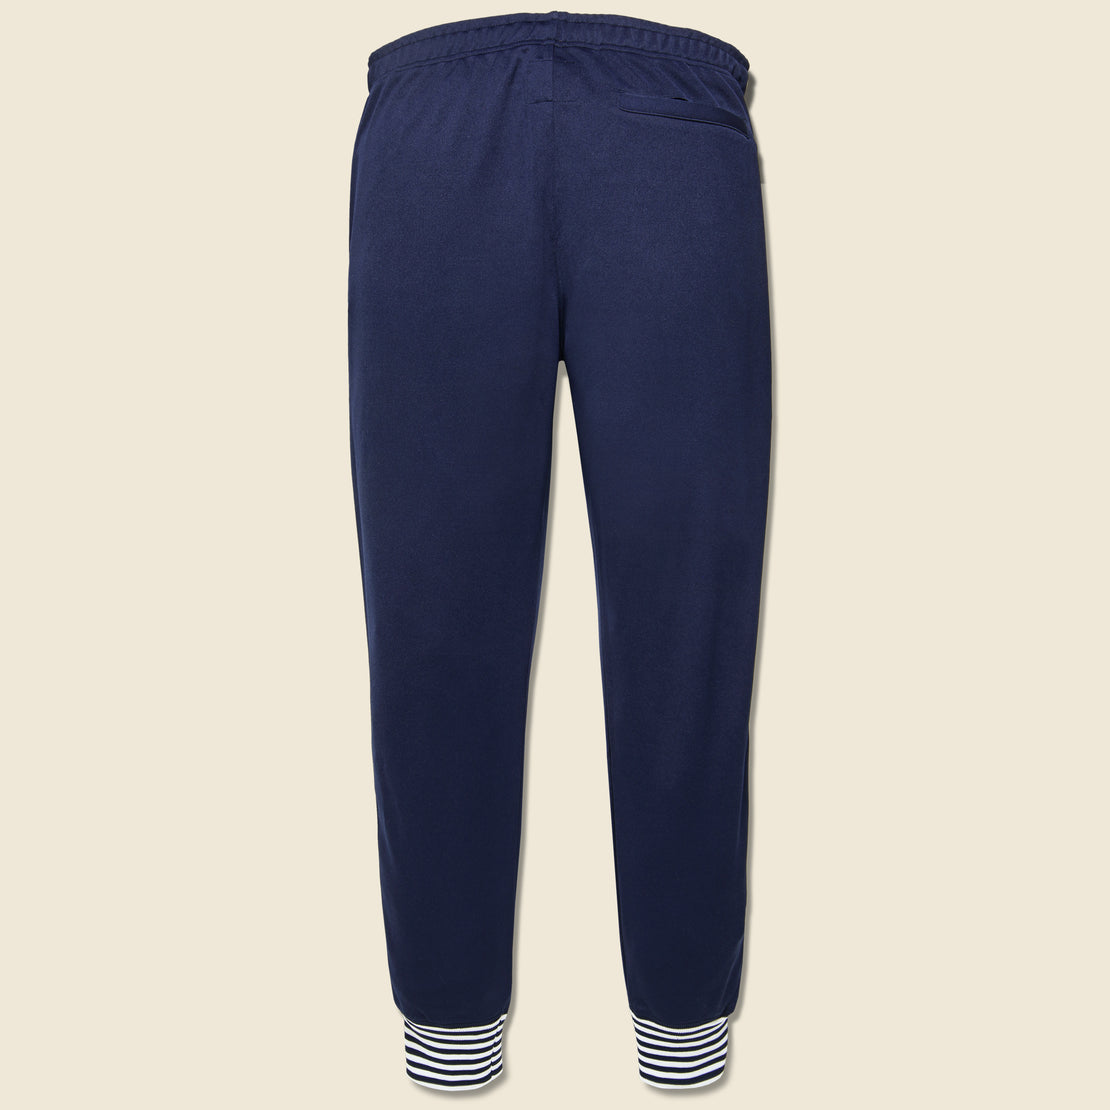 Todd Snyder + Champion - Side Stripe Track Pant - Navy - Todd Snyder - STAG Provisions - Pants - Lounge